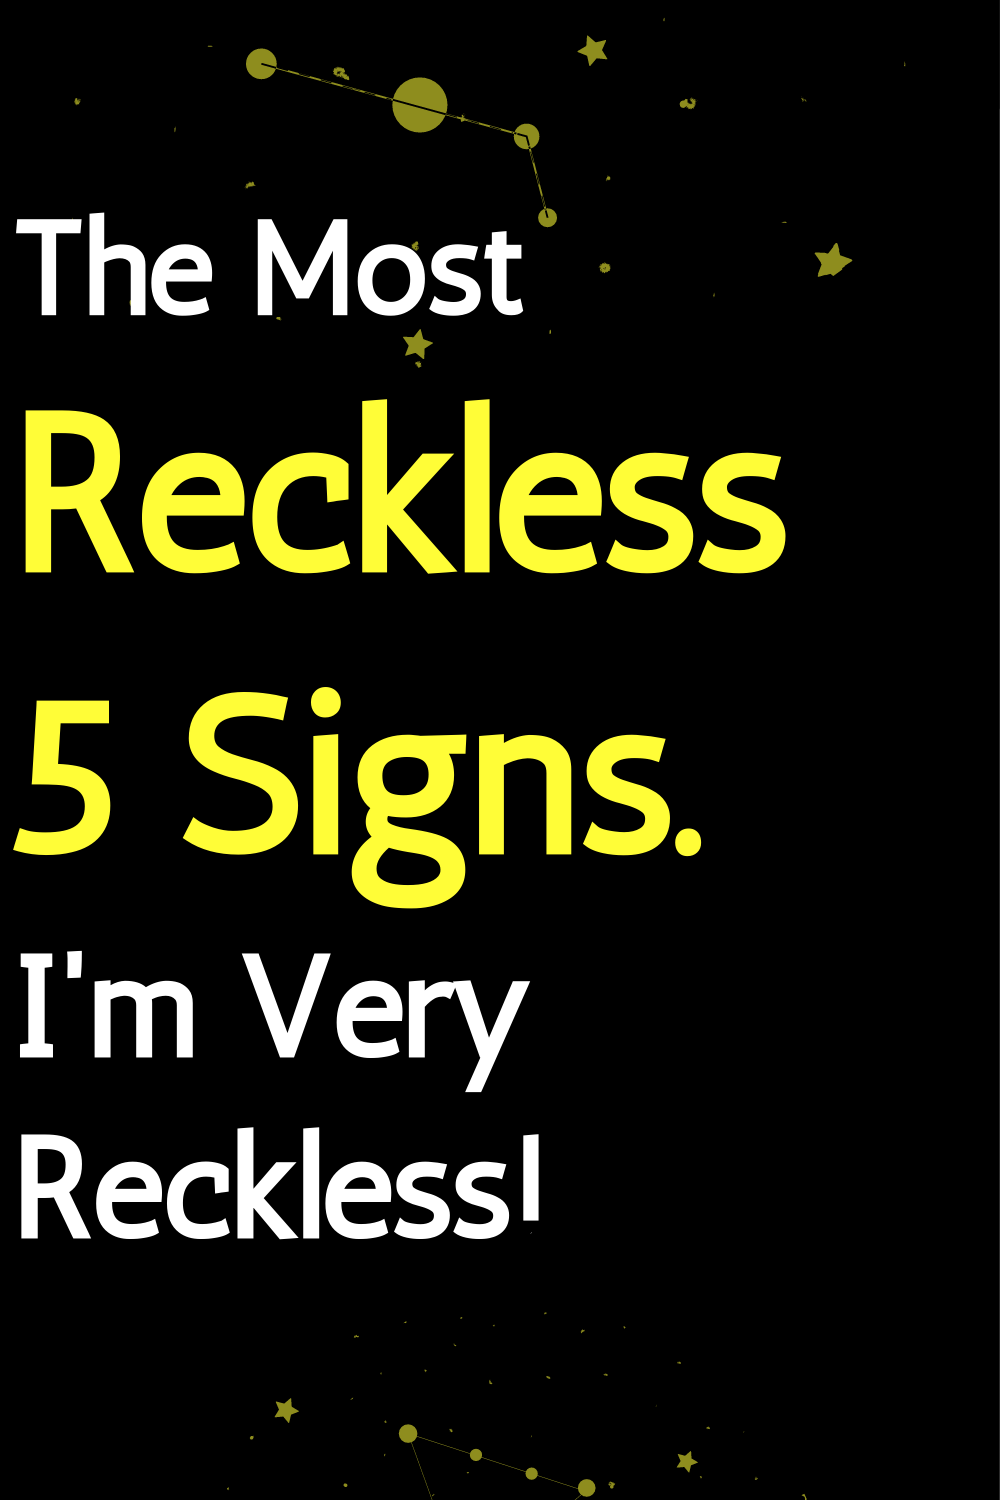 The Most Reckless 5 Signs. I'm Very Reckless!